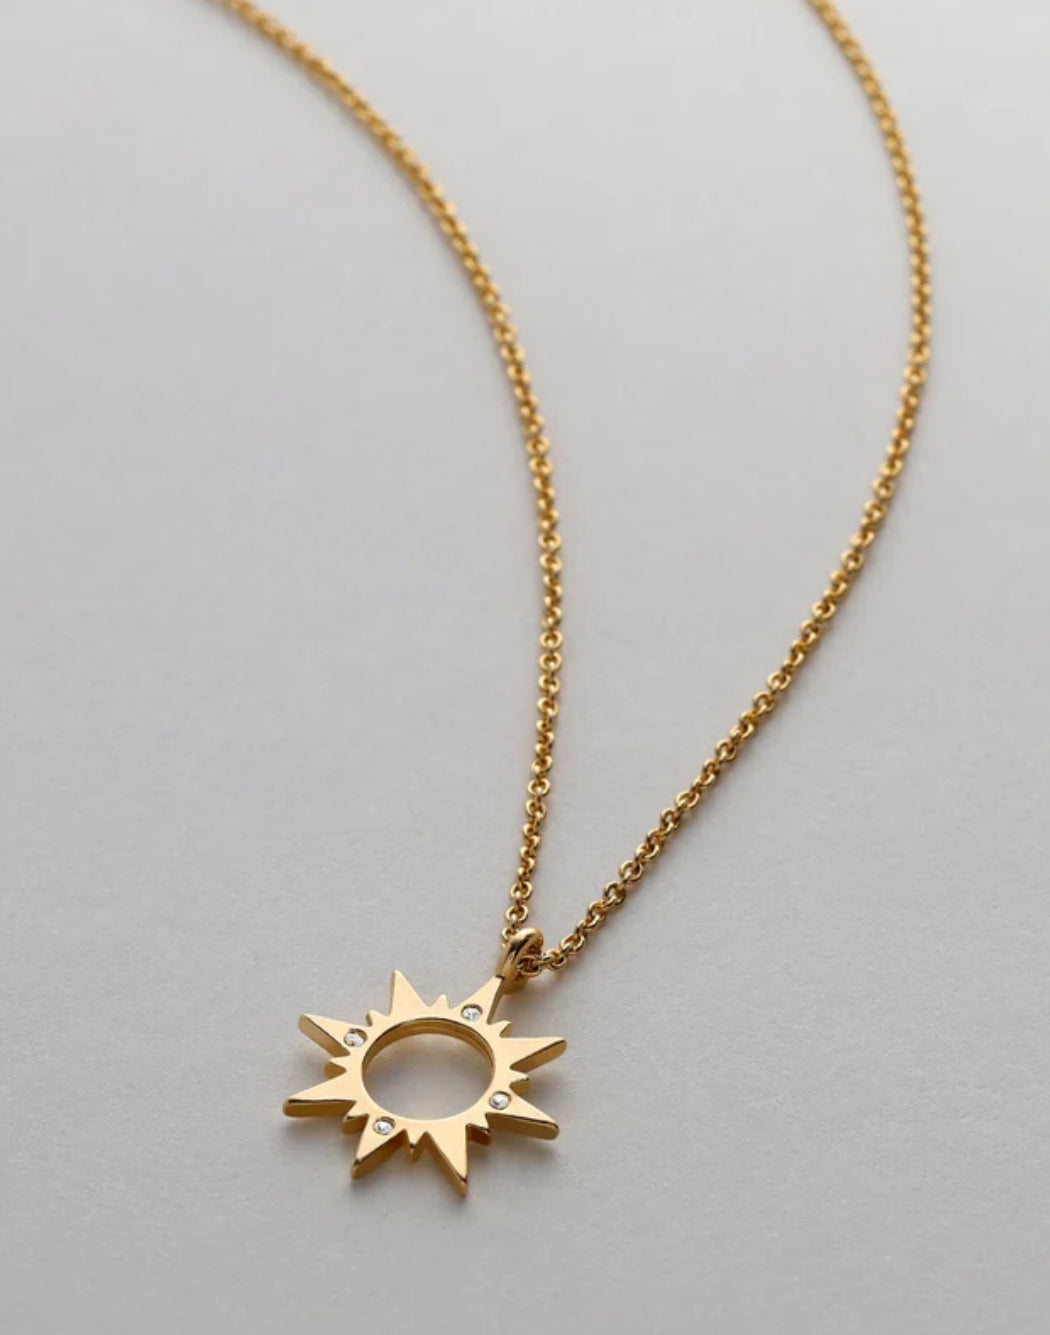 Bryan Anthonys Sun Will Rise Gold Necklace